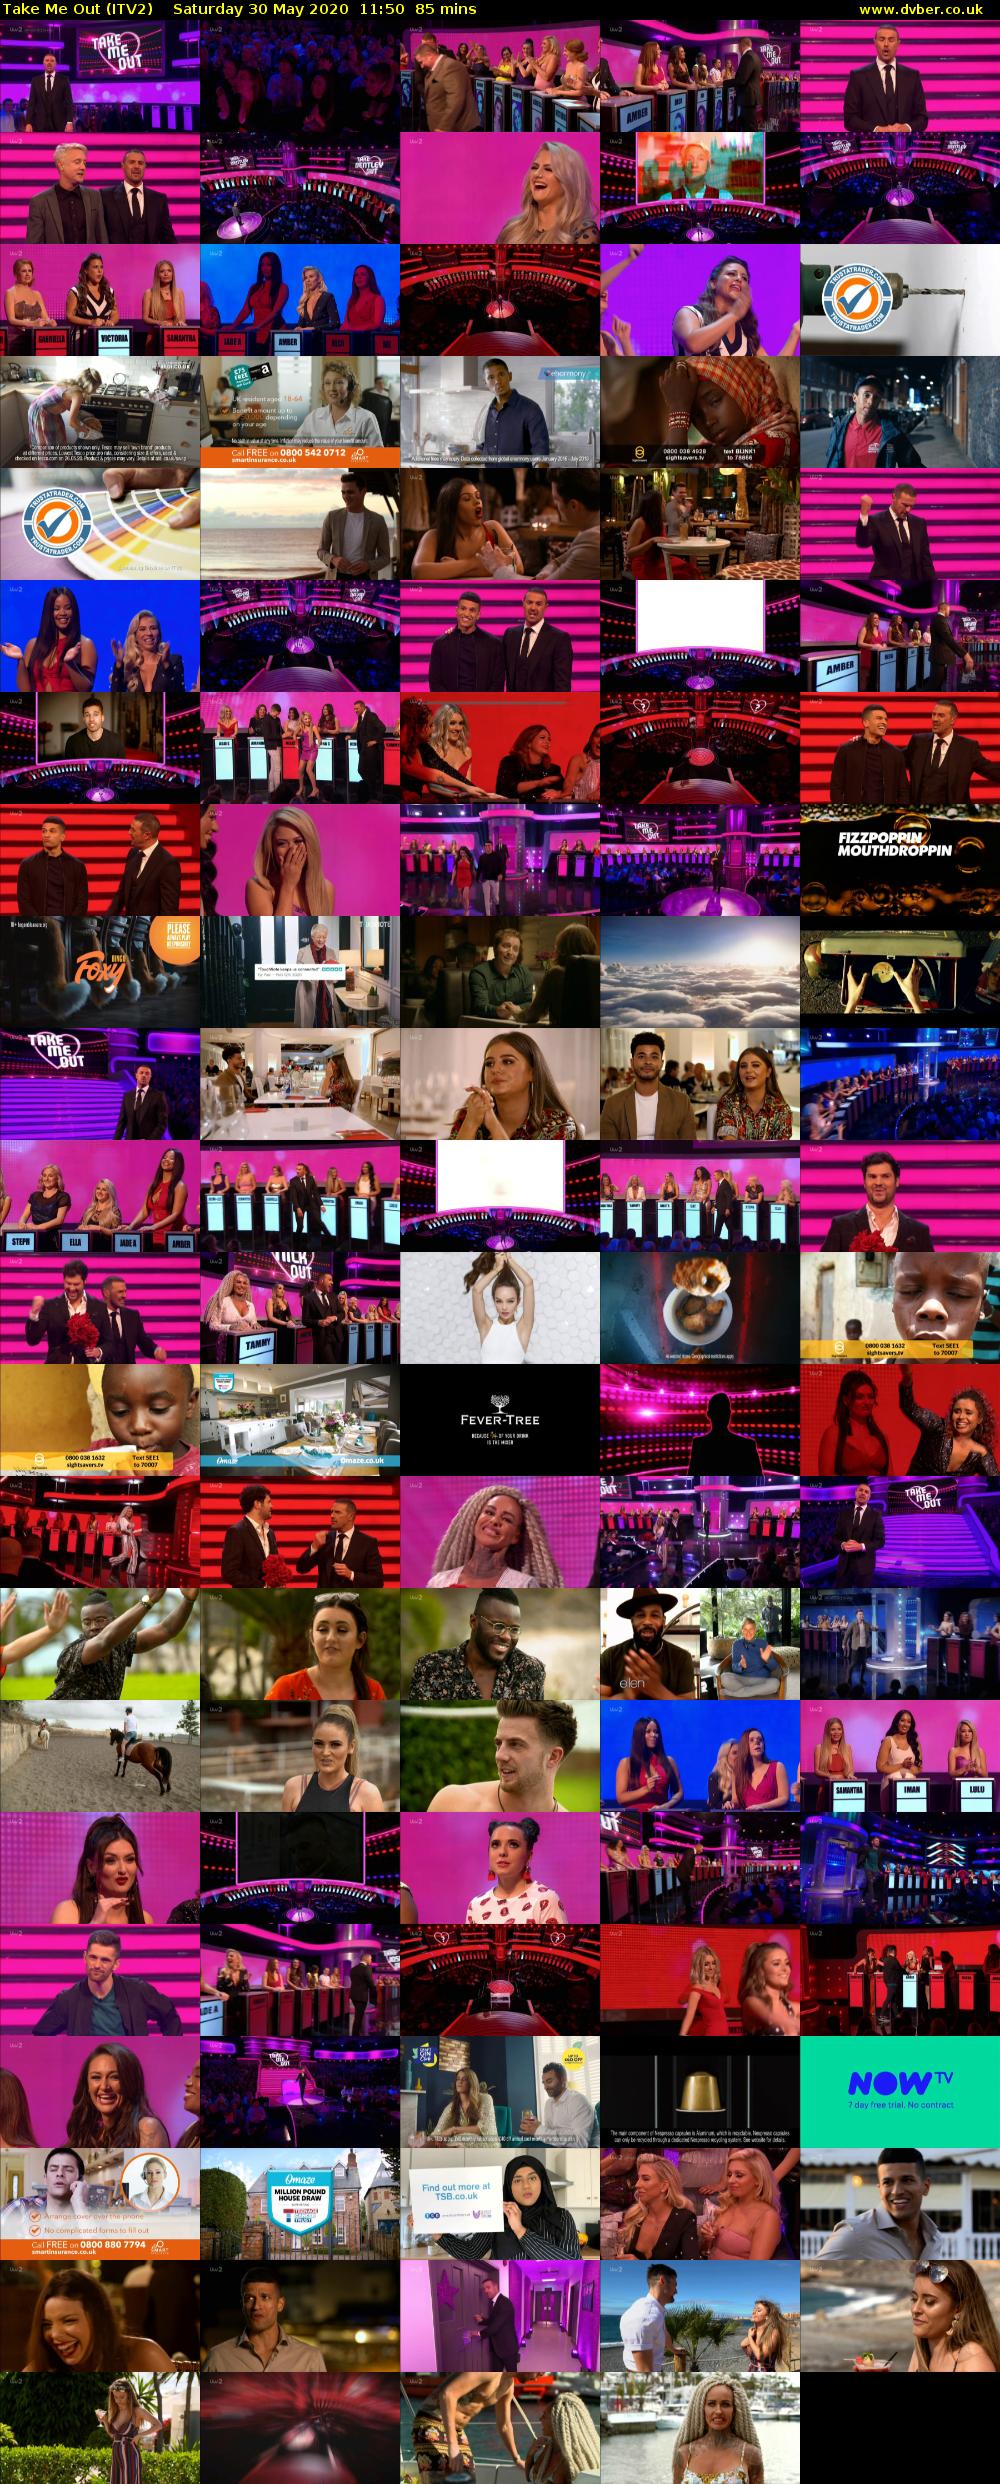 Take Me Out (ITV2) Saturday 30 May 2020 11:50 - 13:15